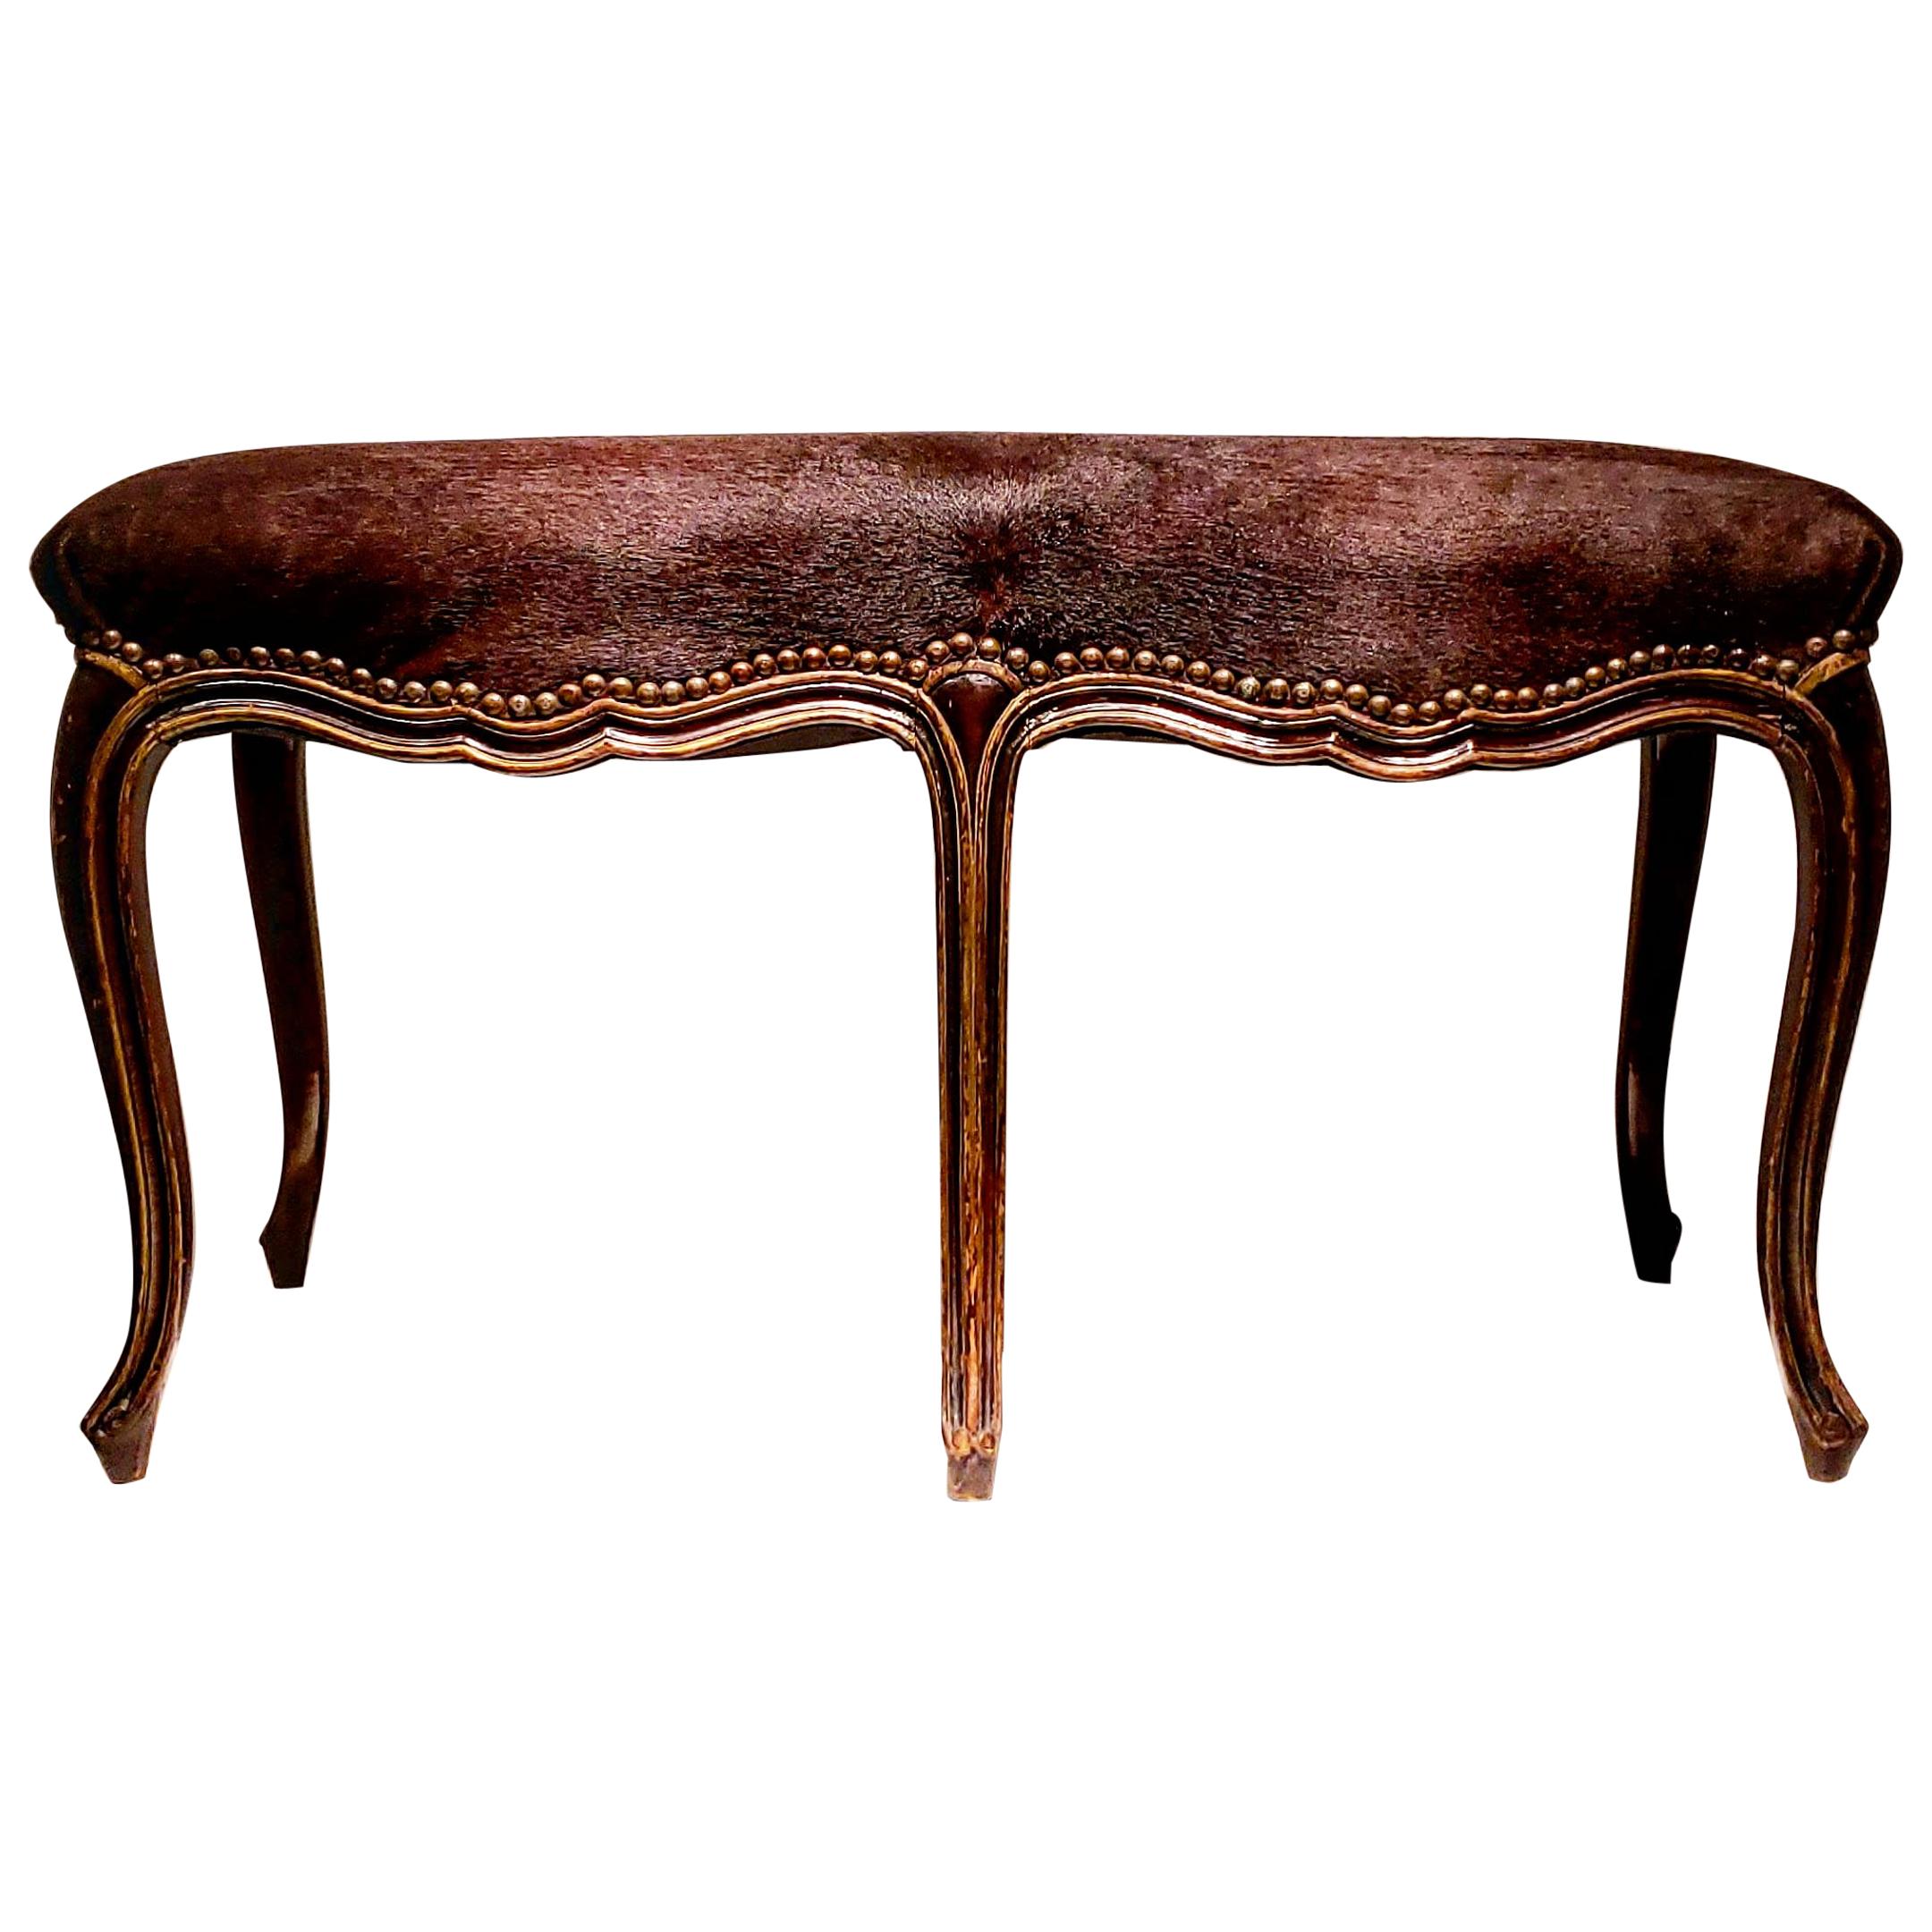 Late 19th Century French Louis XV Style Bench